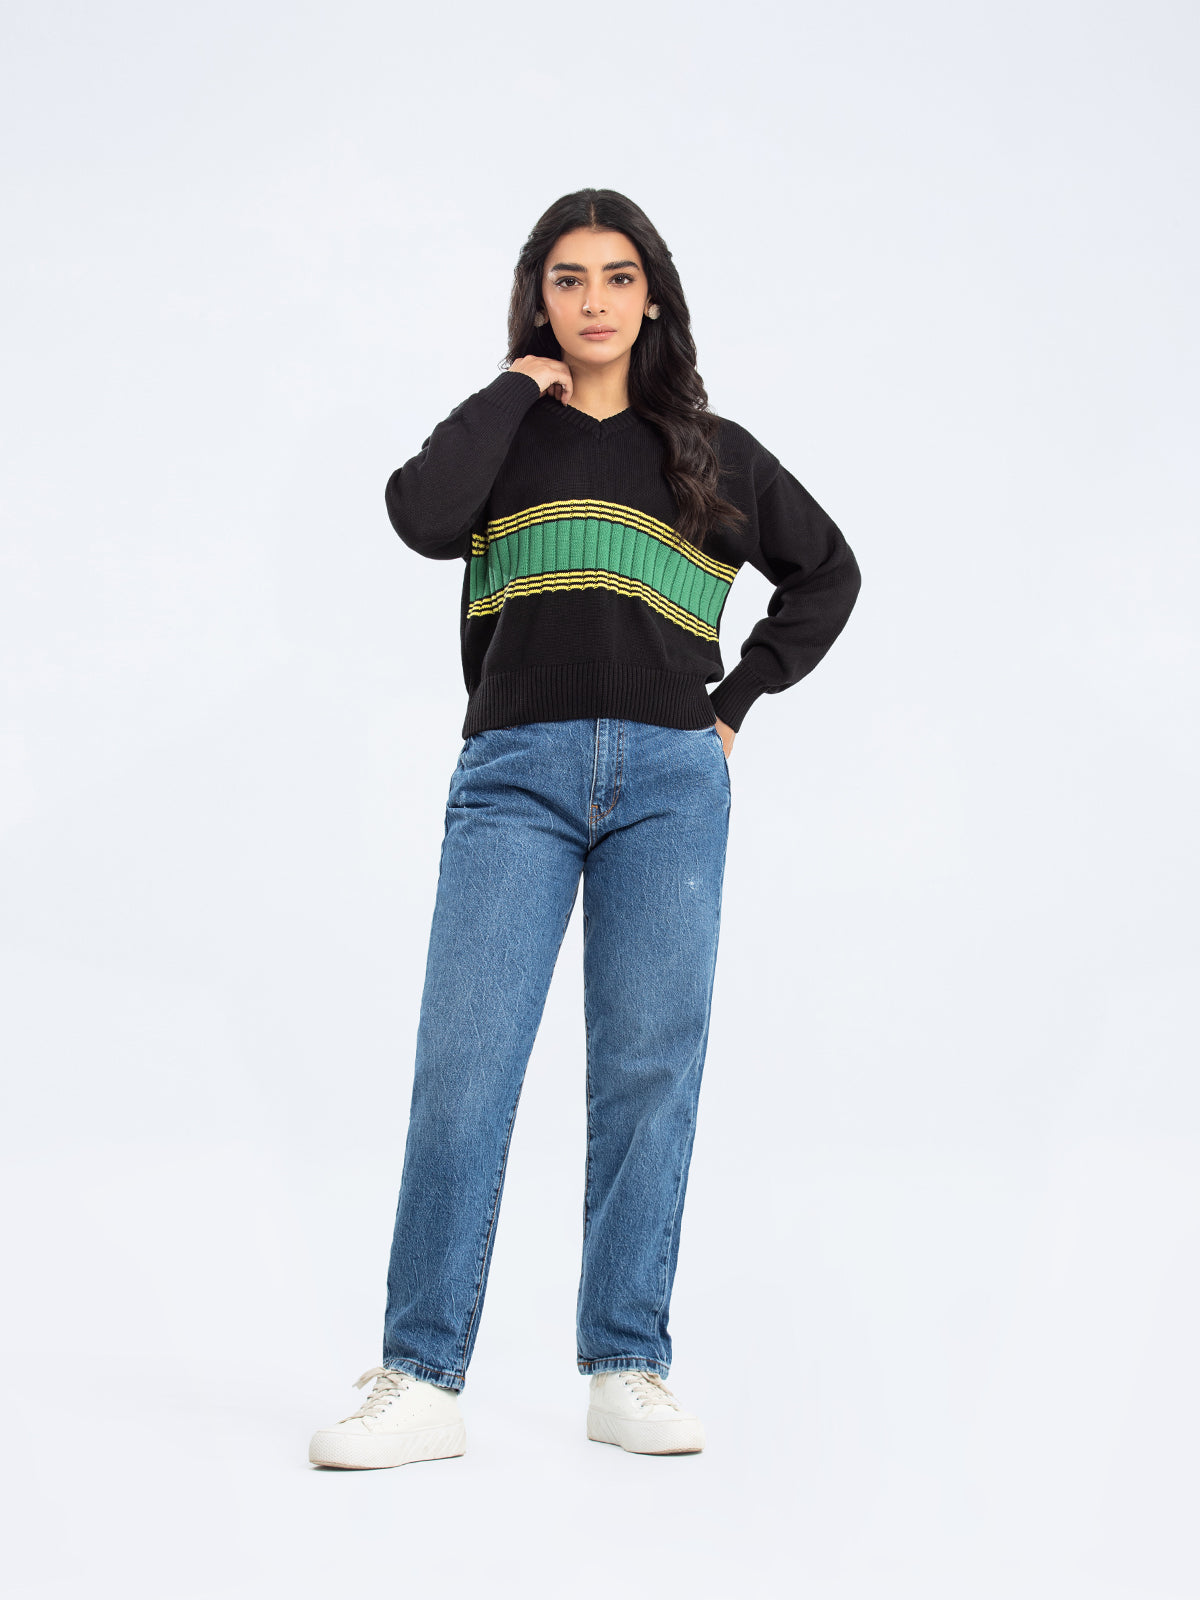 knitted Sweater - FWTSW23-009